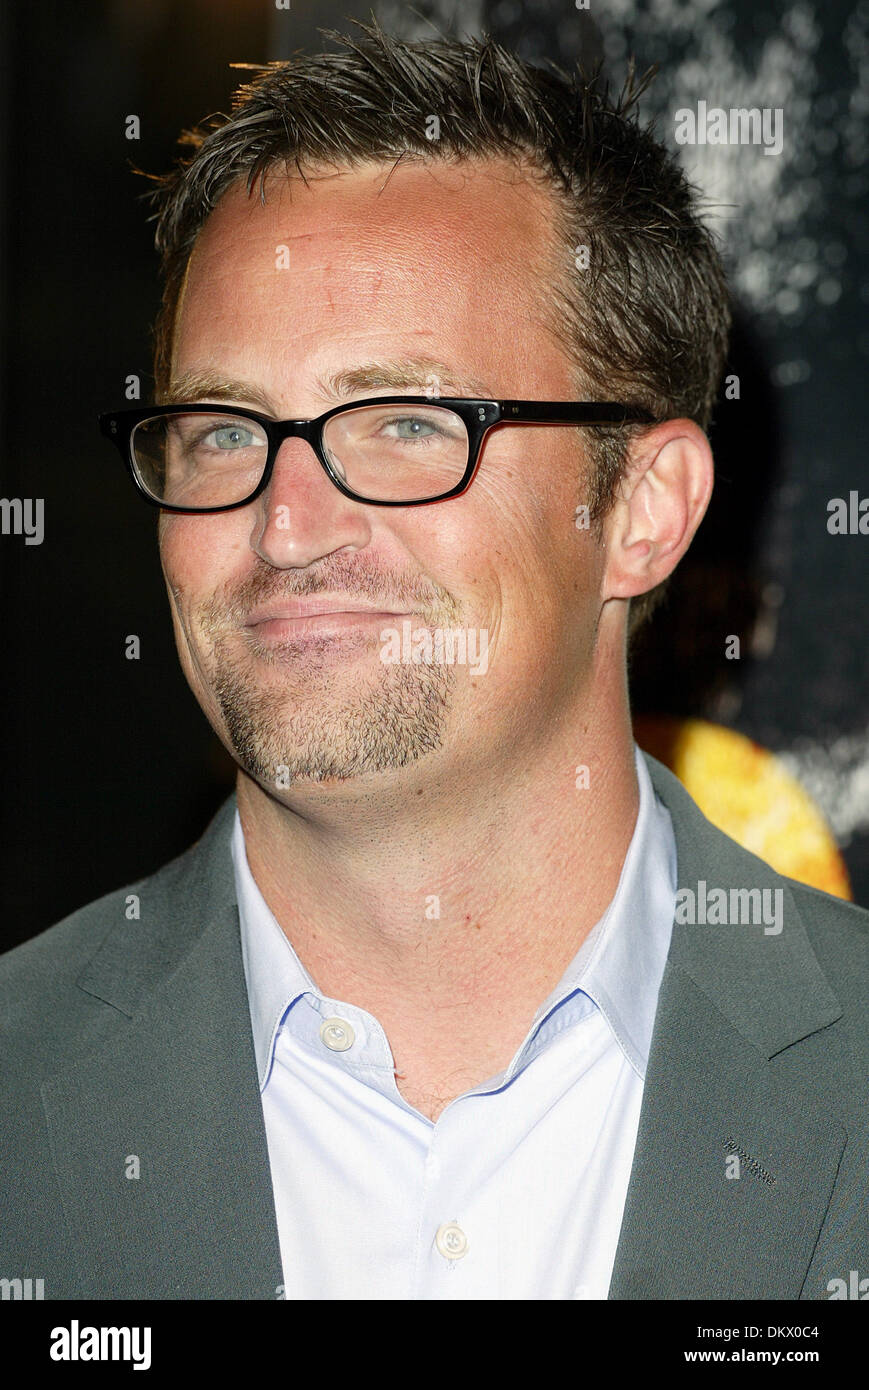 MATTHEW PERRY.ACTOR.WESTWOOD, LOS ANGELES, USA.06/11/2002.LAC10671. Stock Photo